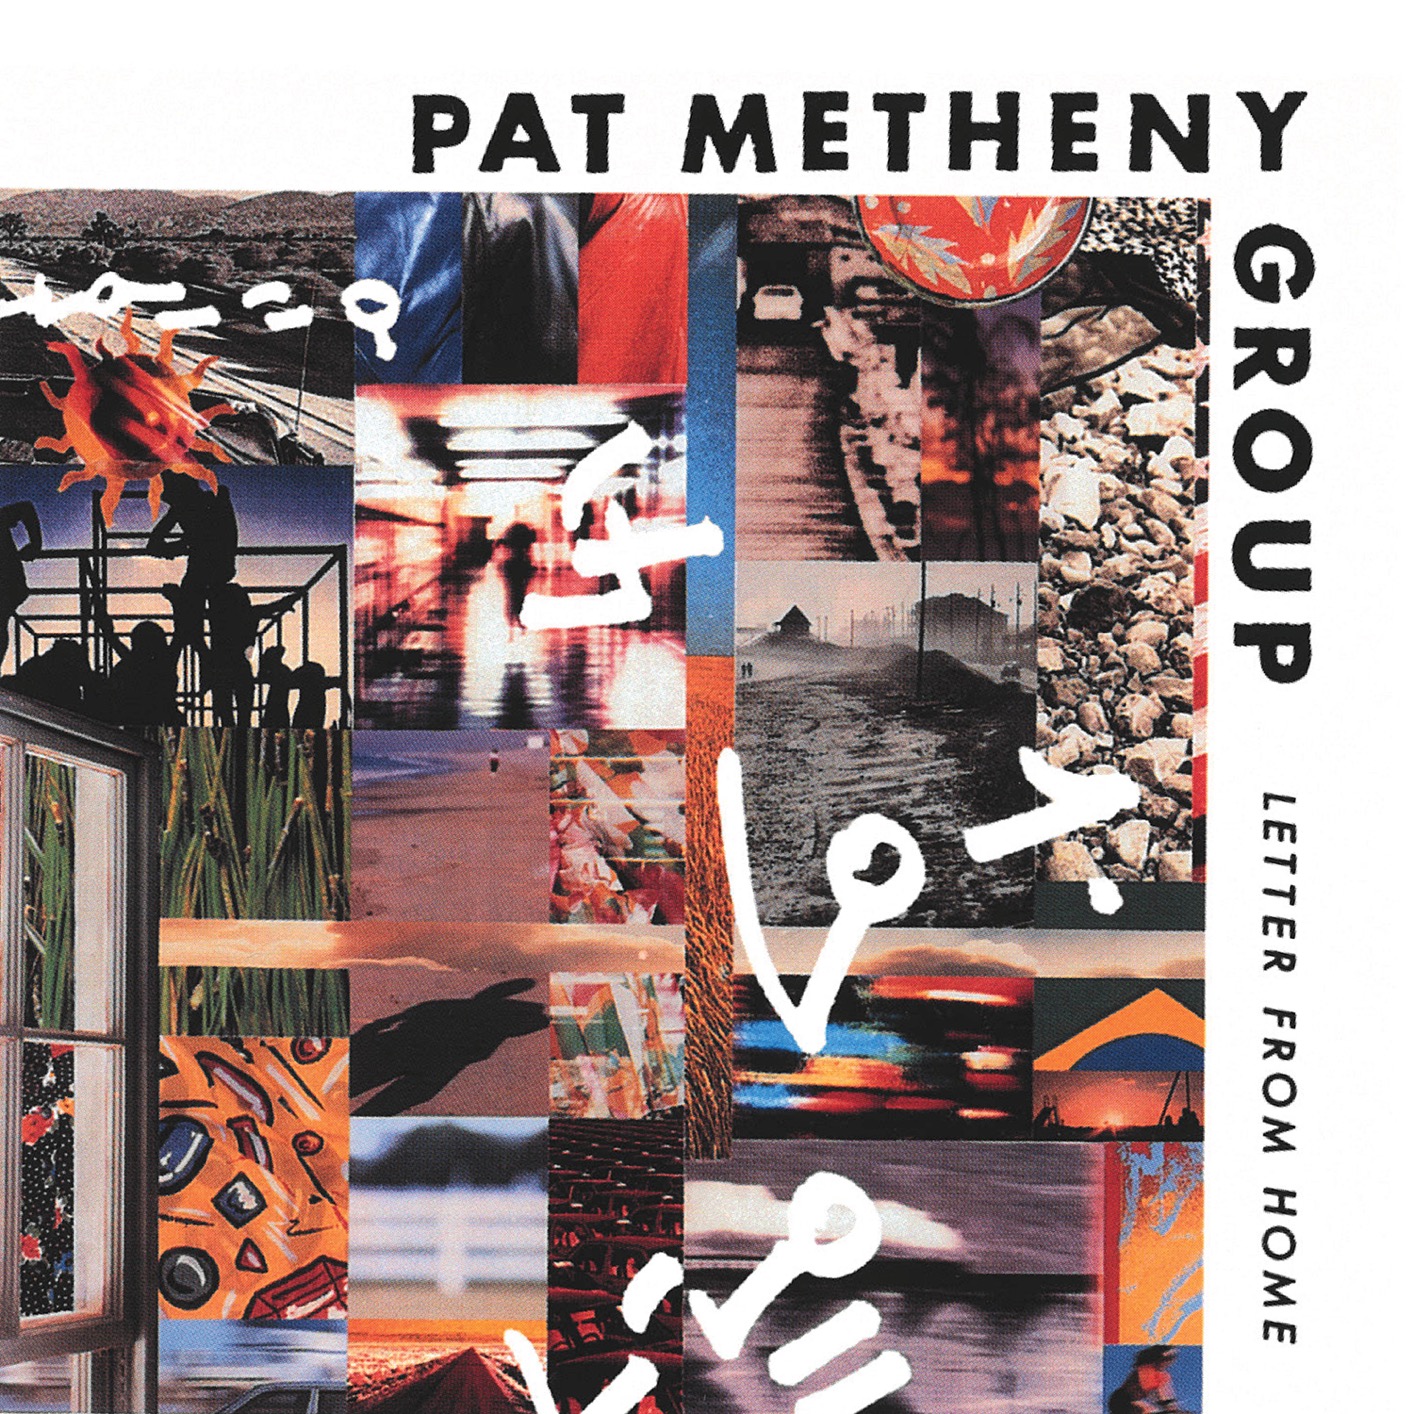 Pat Metheny Group - Letter from Home (1989/2018) [FLAC 24bit/44,1kHz]